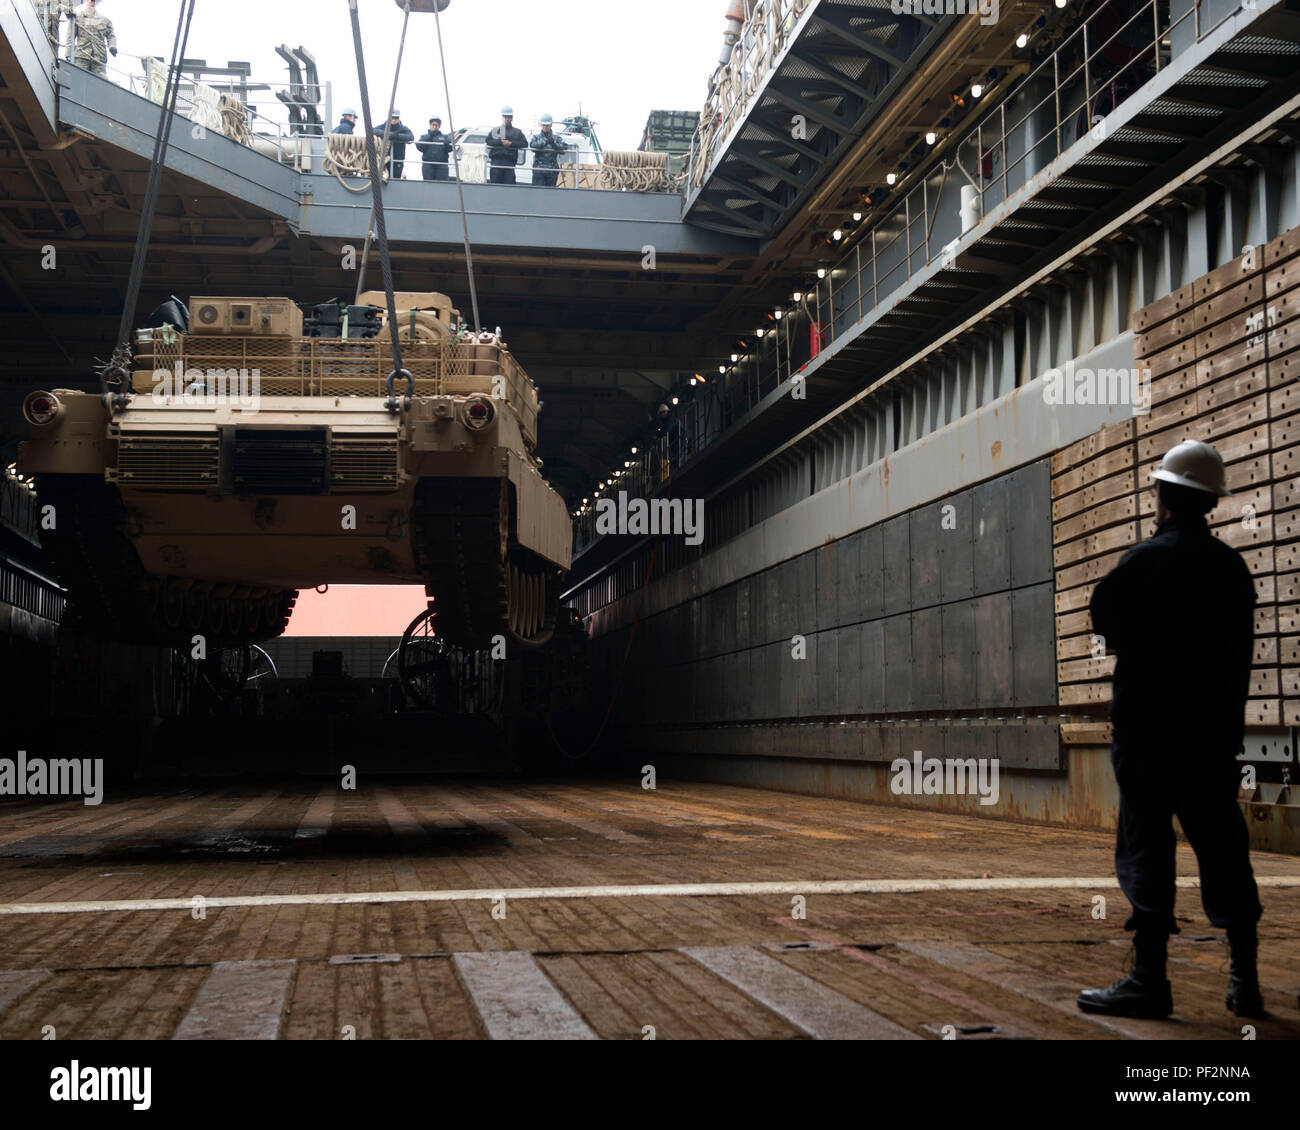 160313-N-KB426-073GWANGYANG, REPUBLIC OF KOREA (Mar. 13, 2016) – Amphibious dock landing ship USS Germantown (LSD 42) onloads a M1A1 Abrams Main Battle Tank, attached to Delta Company 1st Tank Battalion, Delta Company, 1st U.S. Marine Division. Germantown is assigned to the Bonhomme Richard Expeditionary Strike Group (BHRESG) and is participating in Ssang Yong 16 a biennial combined amphibious exercise designed to strengthen interoperability and working relationships across a wide range of military operations from disaster relief to complex expeditionary operations. (U.S. Navy photo by Mass Co Stock Photo